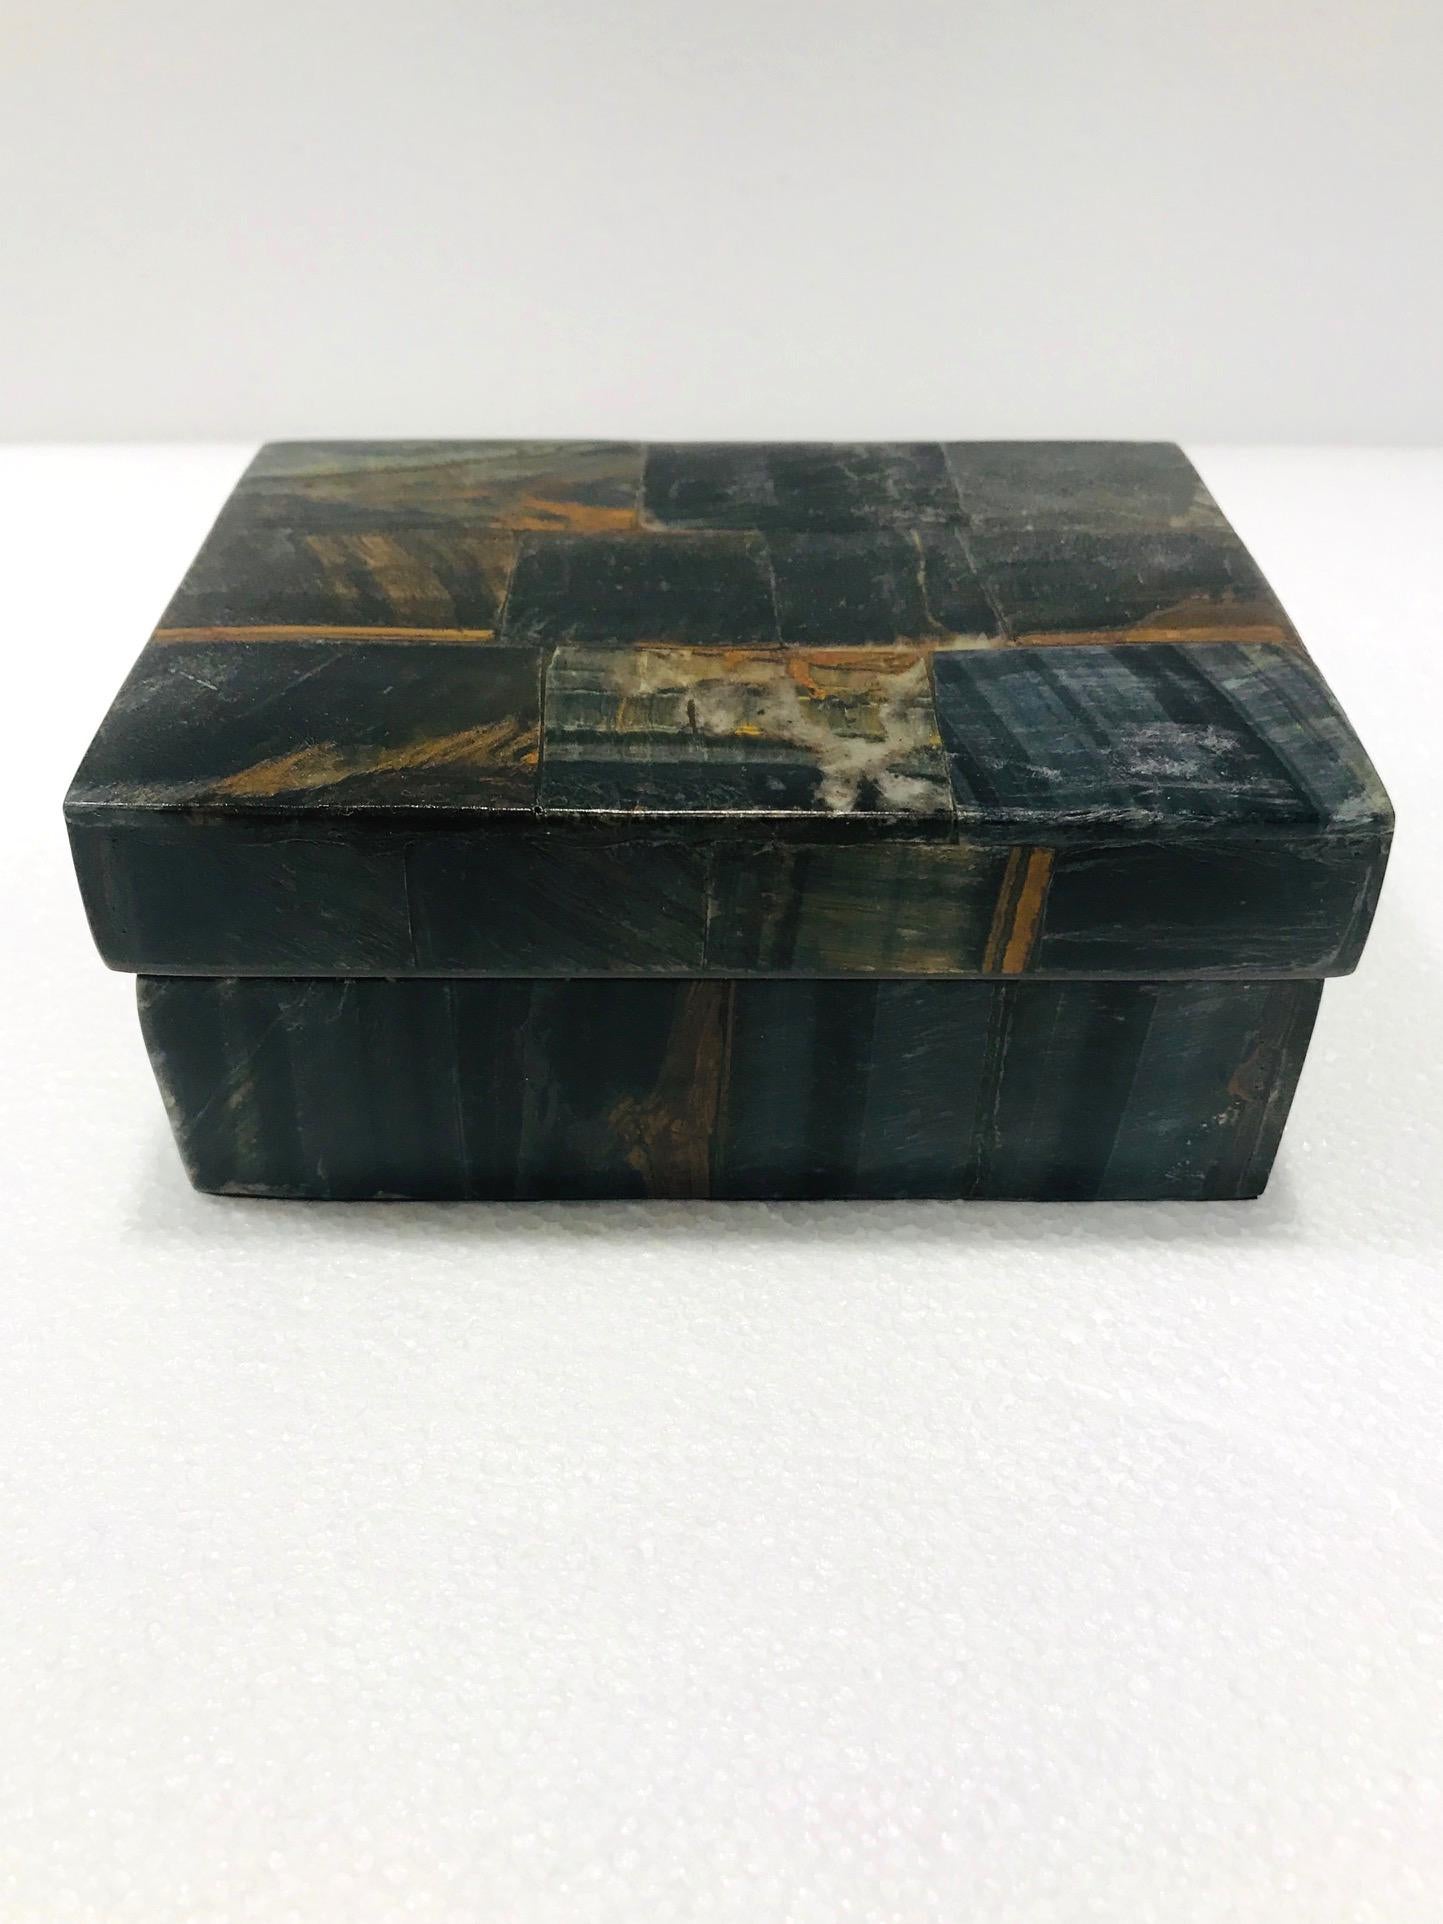 Organic Modern decorative box in semi-precious blue tiger eye stone, also known as falcon's eye. Tessellated design featuring inlays of multicolored stone in hues of brown, black, blue, rust, and dark green. Interior box is made of palm wood. All